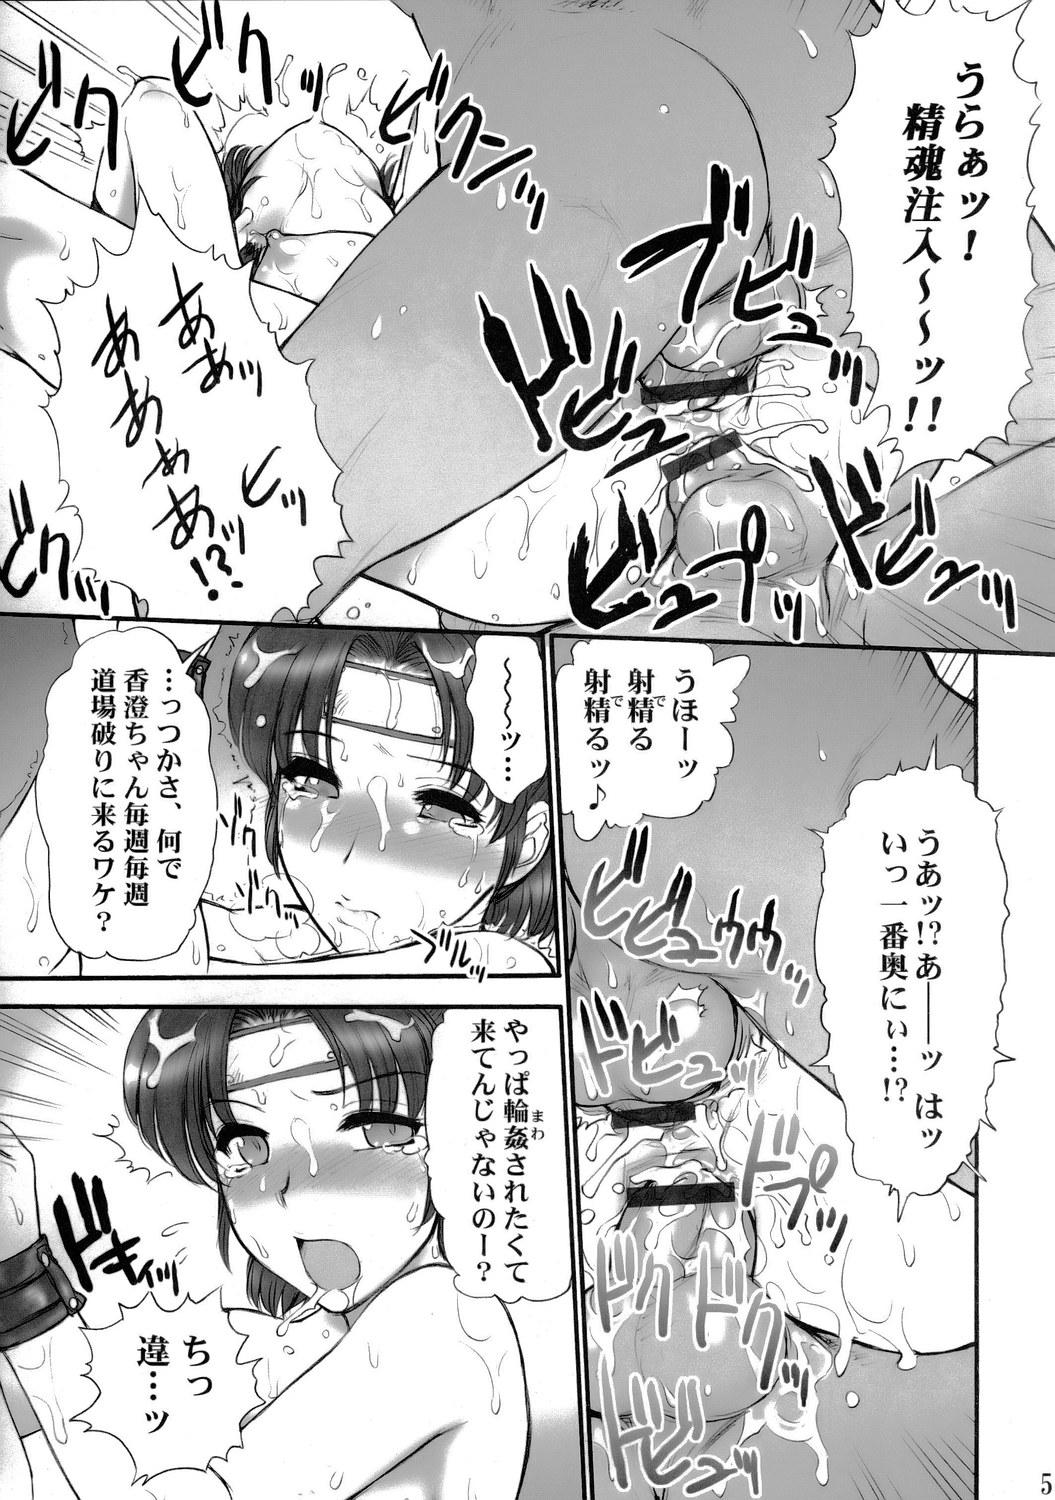 Sexcams (SC29) [Shinnihon Pepsitou (St. Germain-sal)] Report Concerning Kyoku-gen-ryuu (The King of Fighters) - King of fighters Mas - Page 6